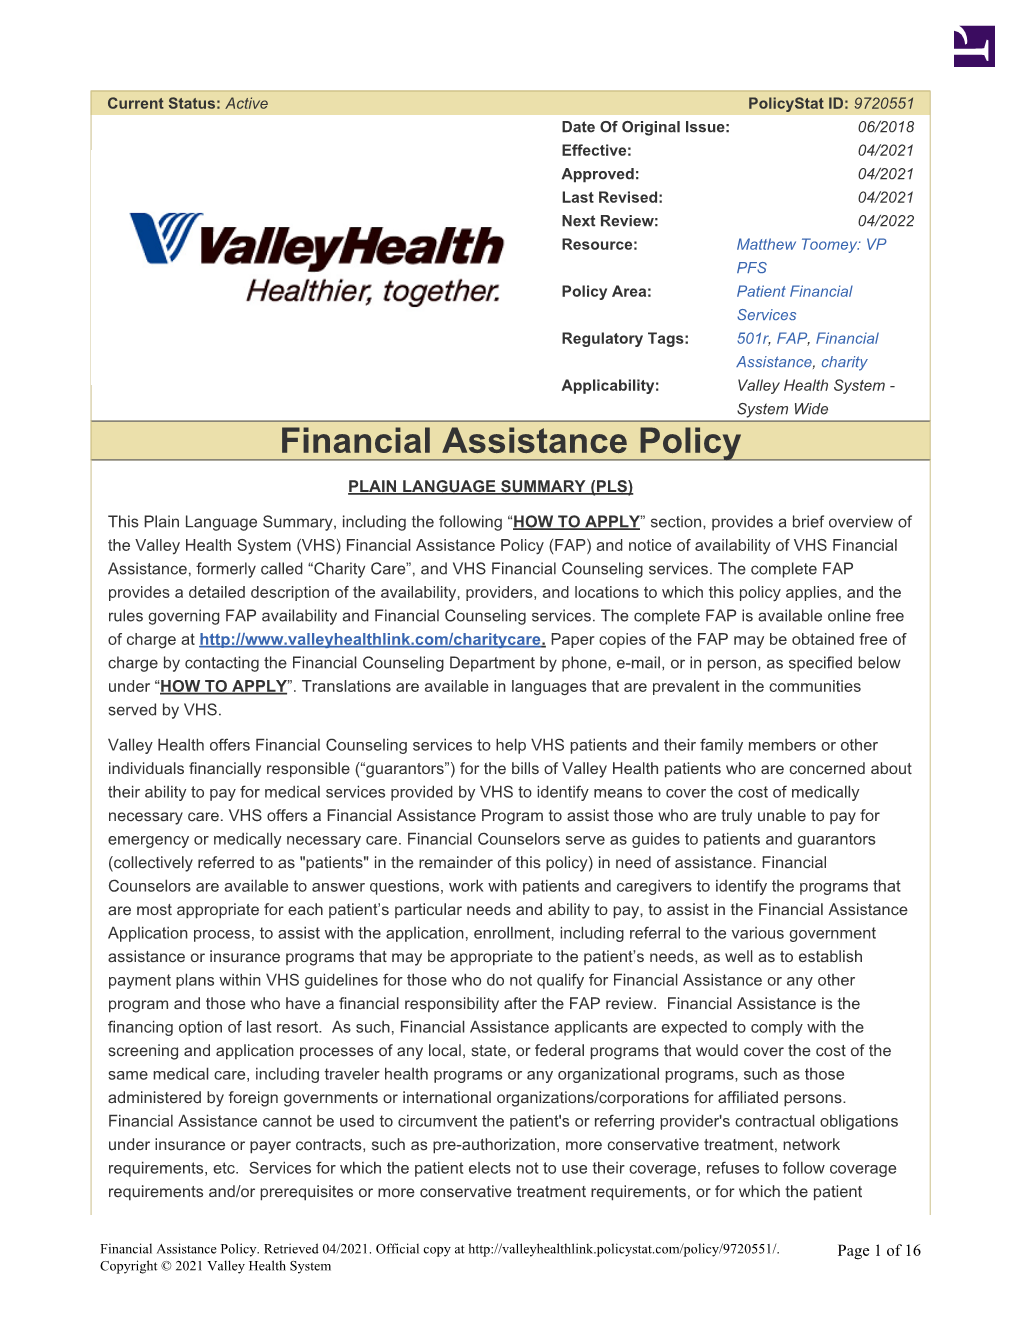 Financial Assistance Policy